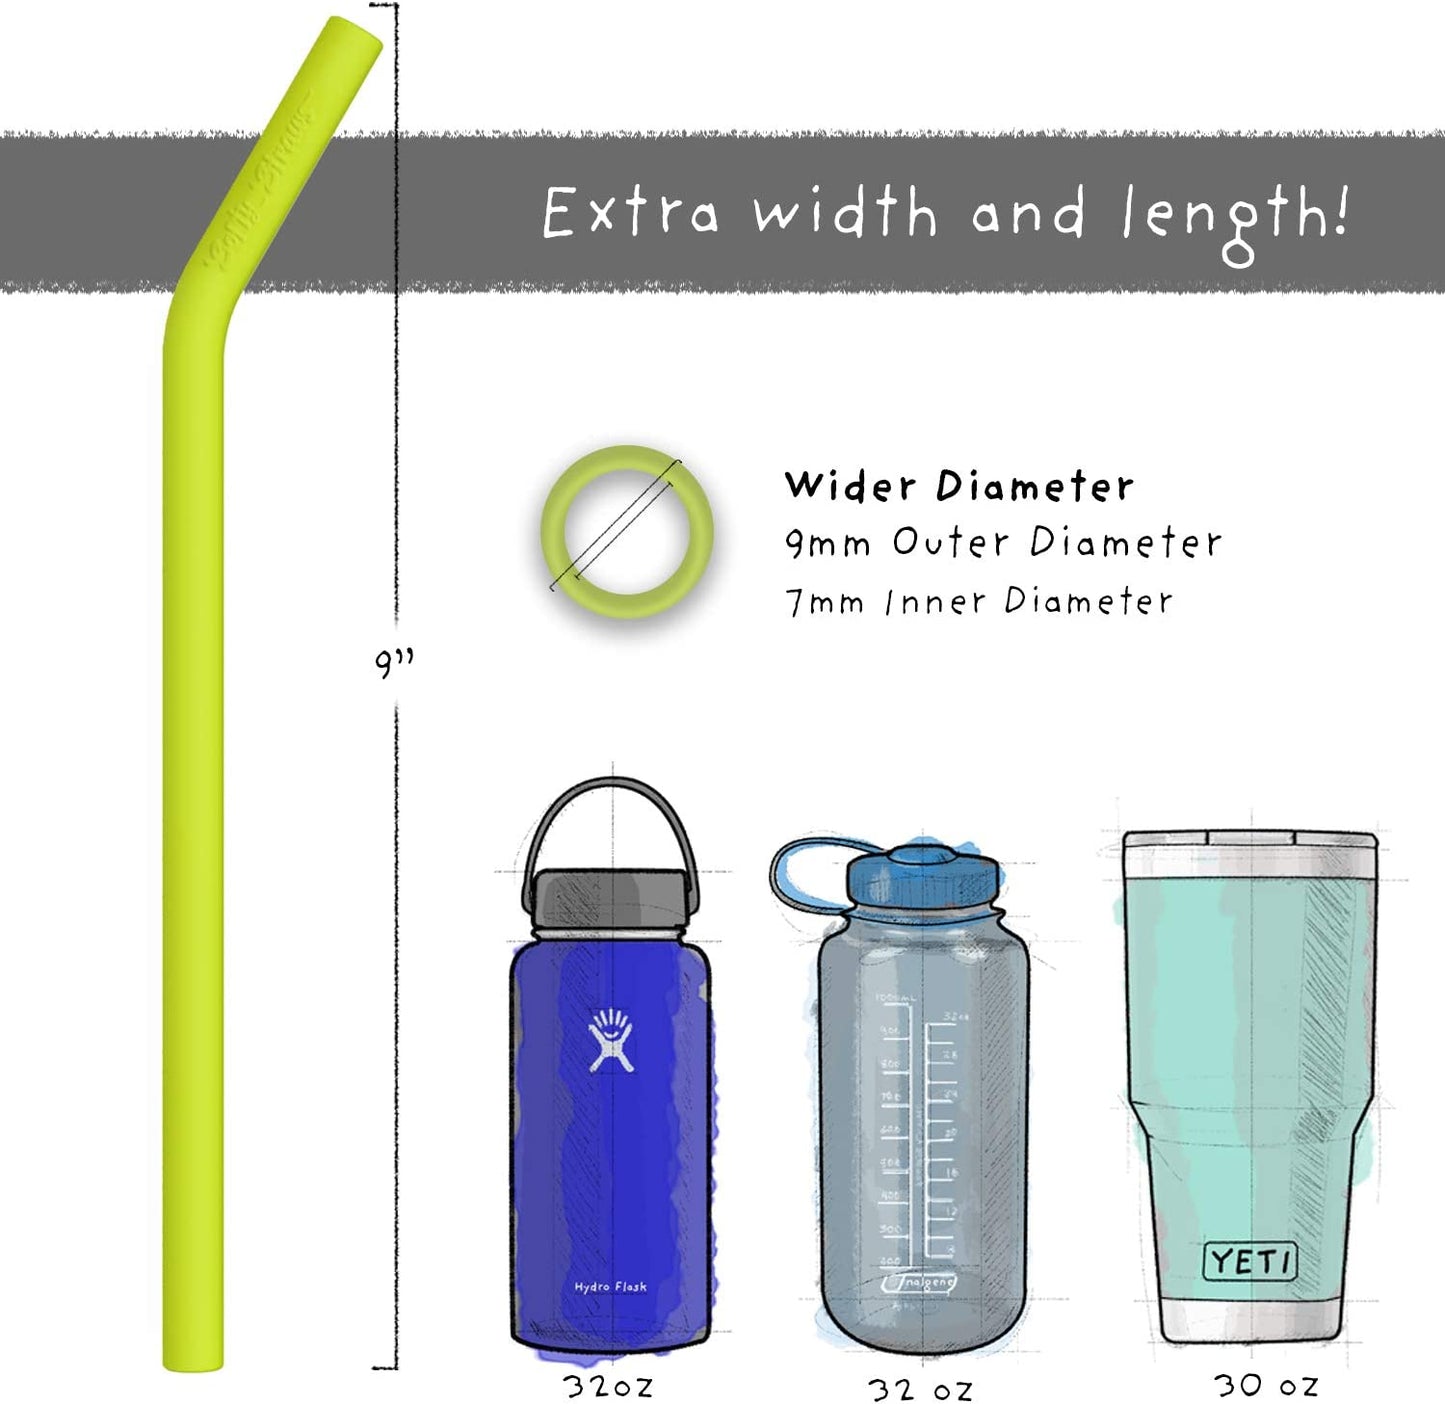 Wide Premium Reusable Silicone Drinking Straws + Patented Straw Squeegee - 9” Long with Curved Bend for 20/30/32Oz Tumblers BPA Free Non Rubber, Flexible, Safe for Kids/Toddlers